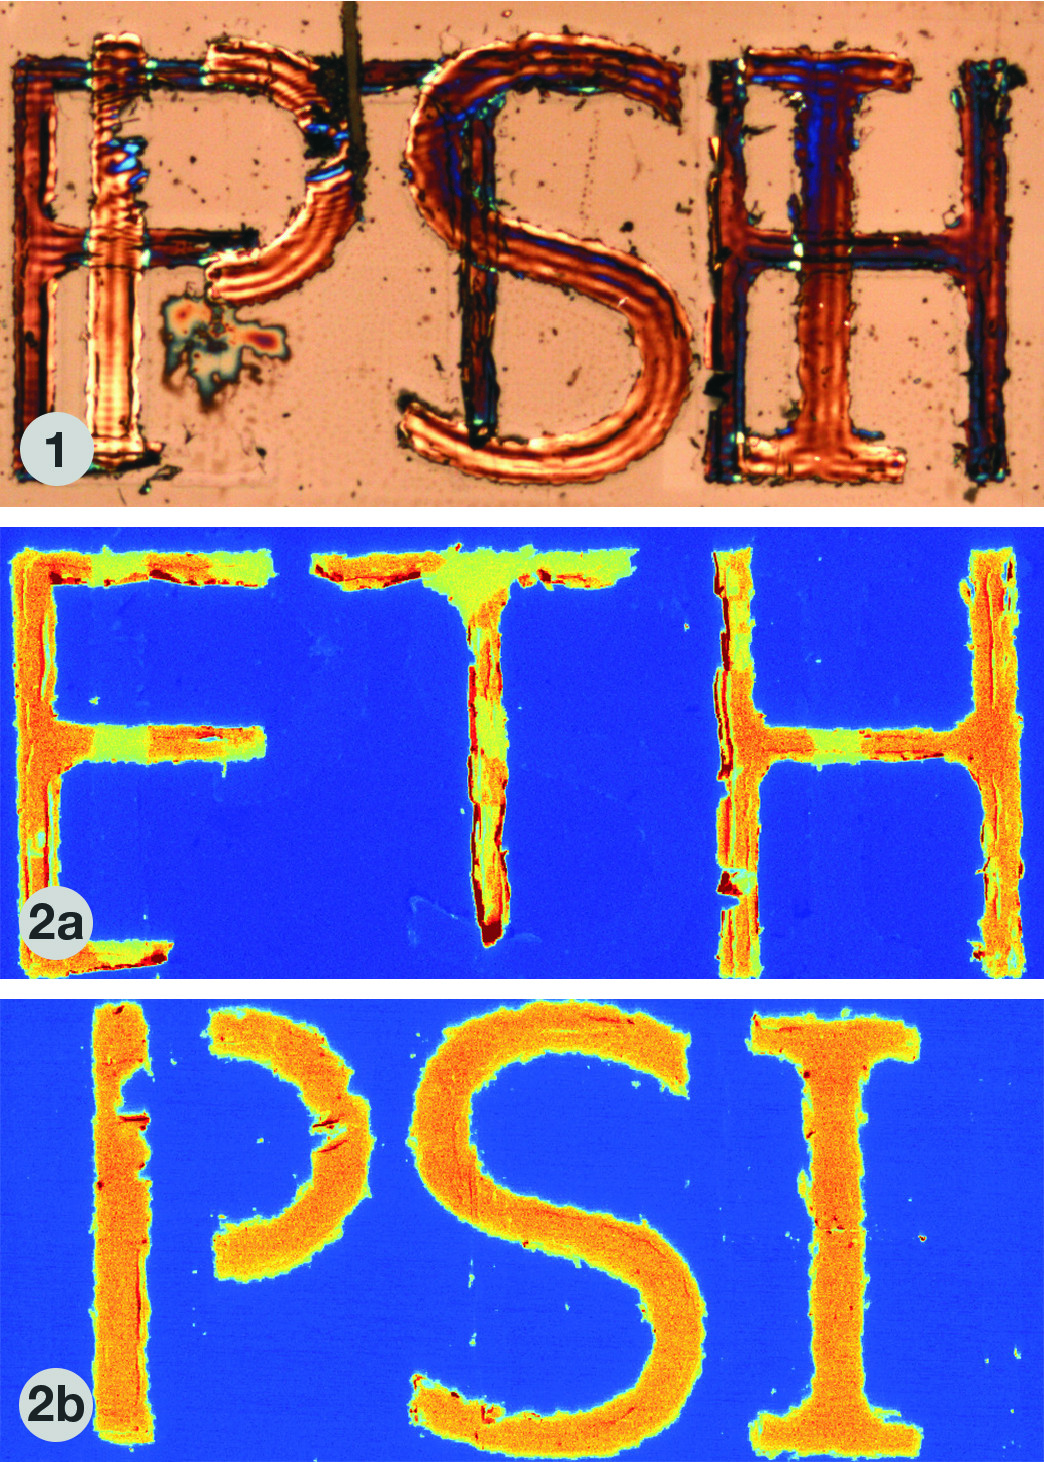 With chemical imaging, different chemicals can be made visible independently. Here the abbreviations ETH and PSI are written in the metals gold and silver. In a conventional optical microscope (1), one would see the two sets of lettering superimposed. In a chemical microscope (2a, 2b), each of the two metals can be made visible, so that the characters are clearly legible. (Reprinted with permission from Anal. Chem. 2013, 85, 10112. Copyright 2016 American Chemical Society)